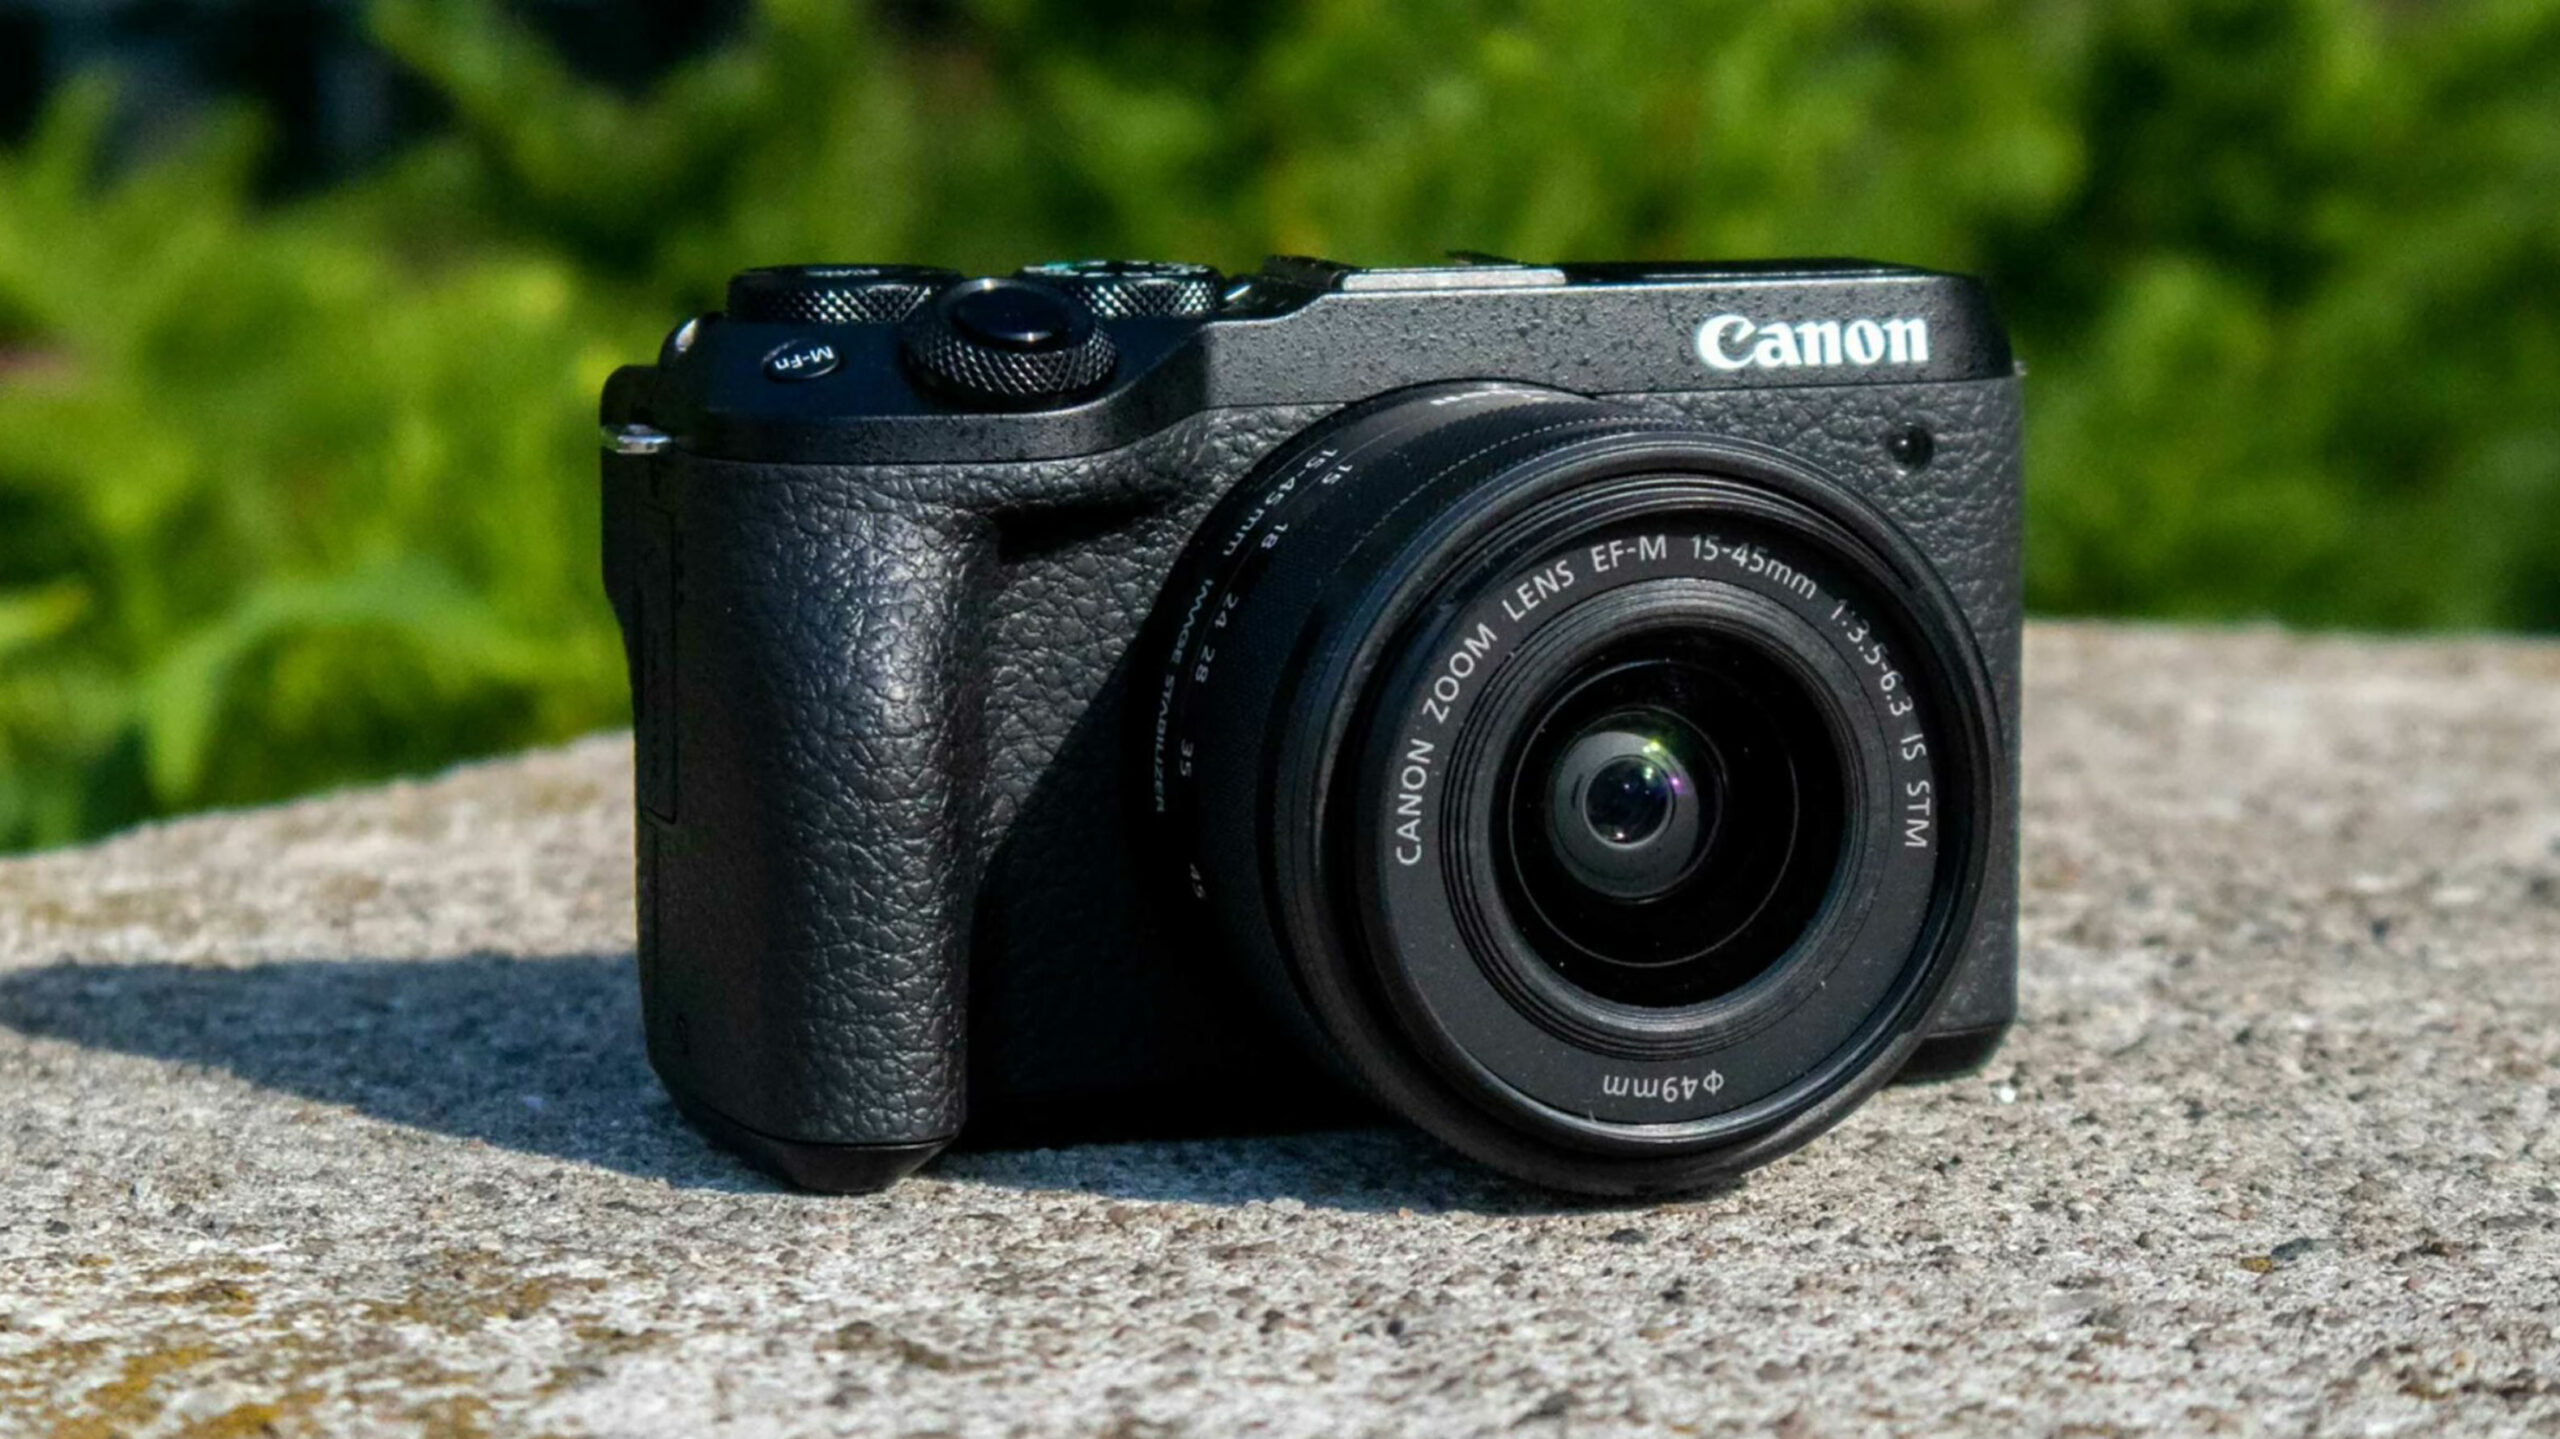 Canon EOS M6 Mark II Review: The compact champ